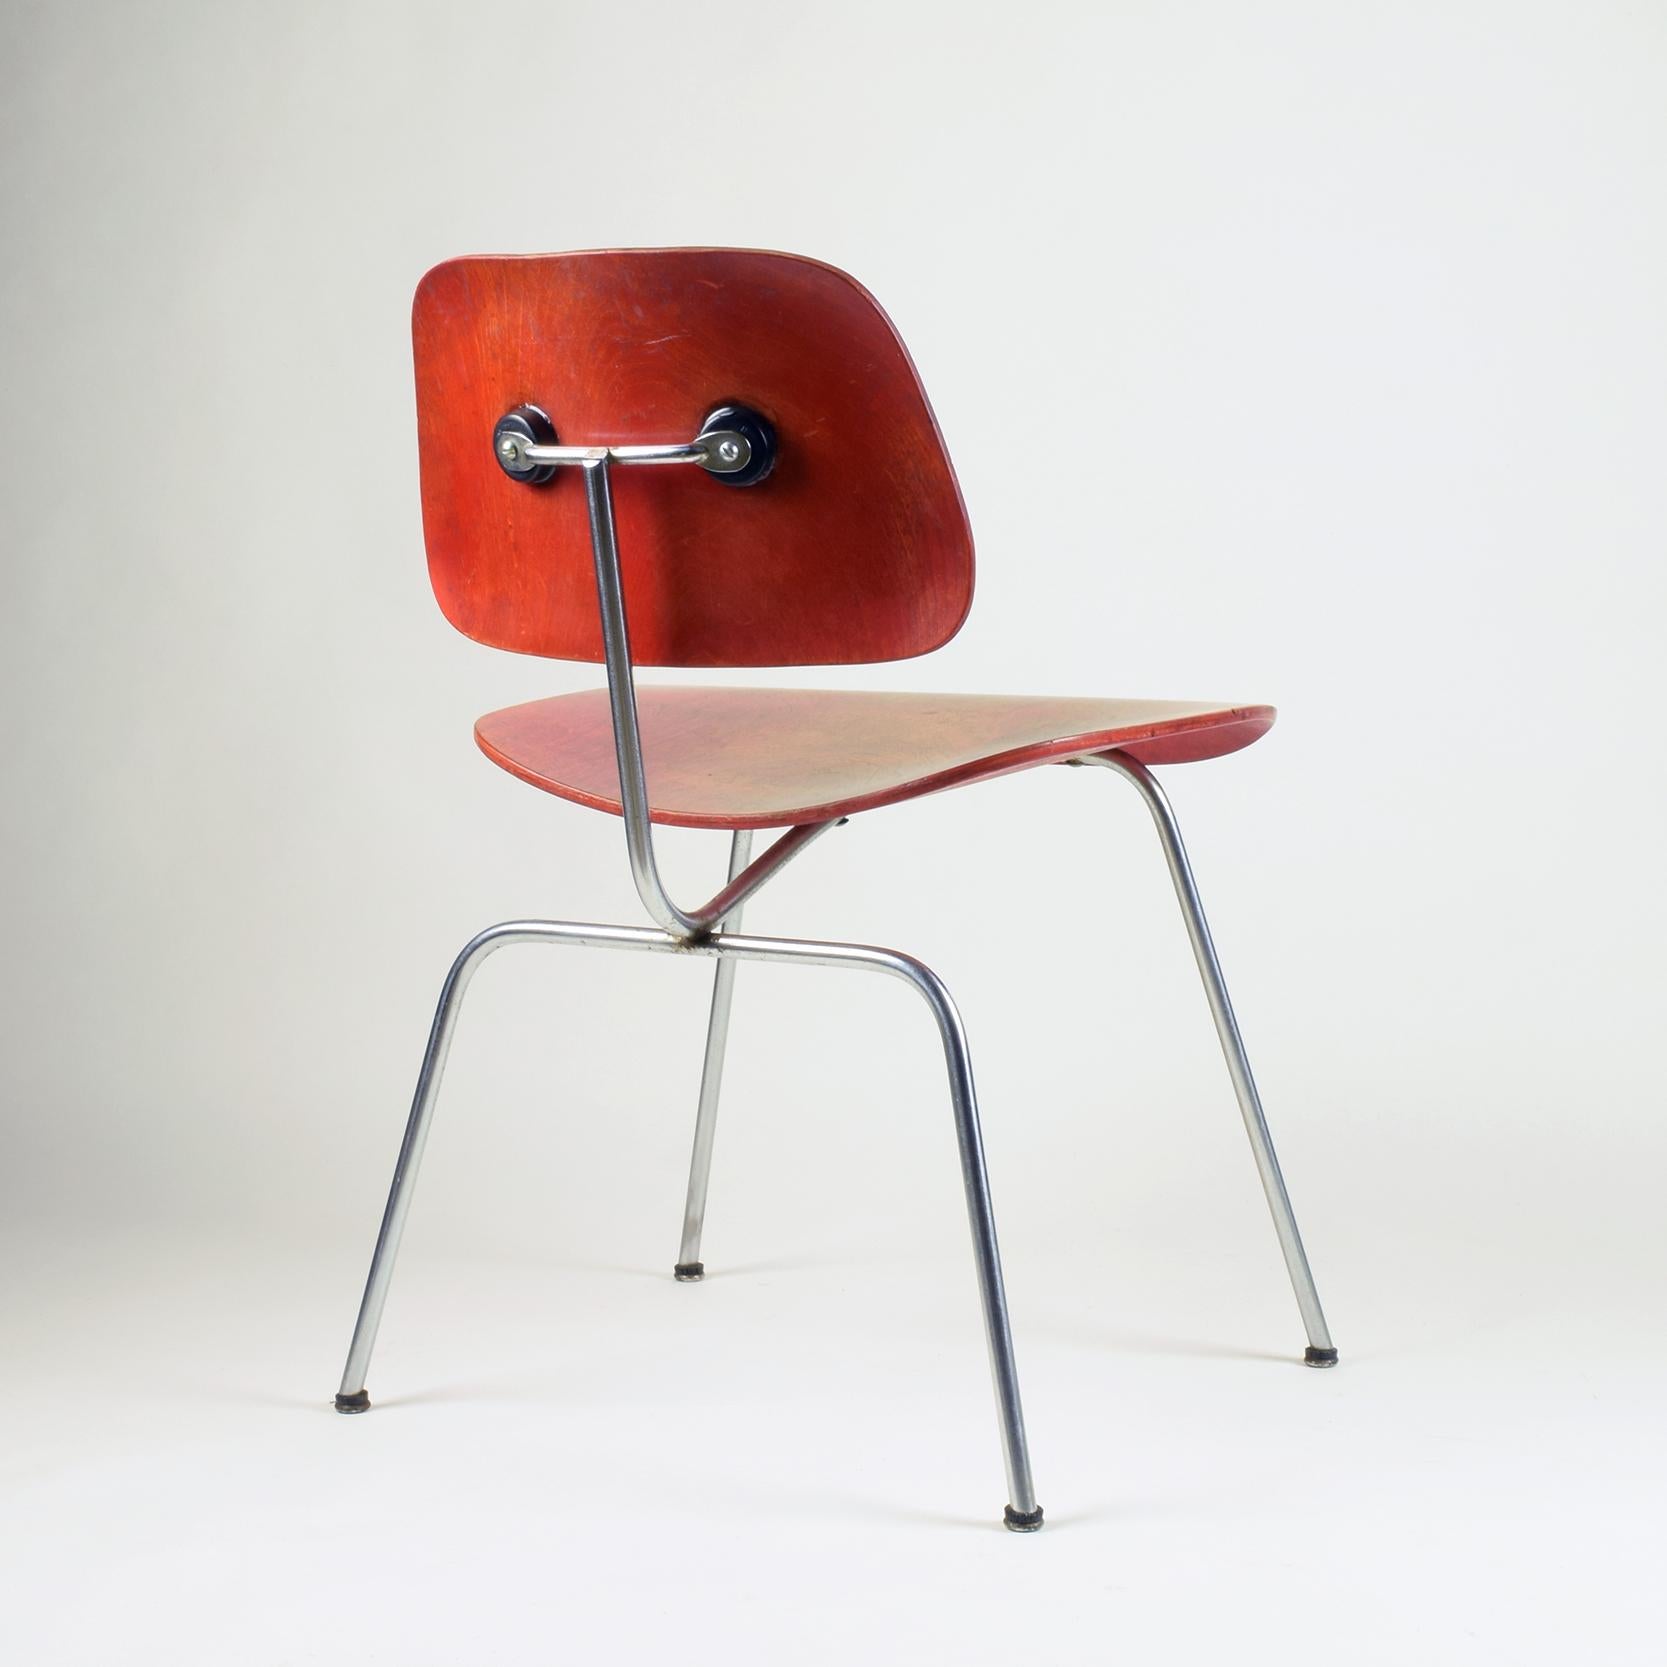 American Charles & Ray Eames, 'DCM' Chair for Herman Miller, Stunning Early Version